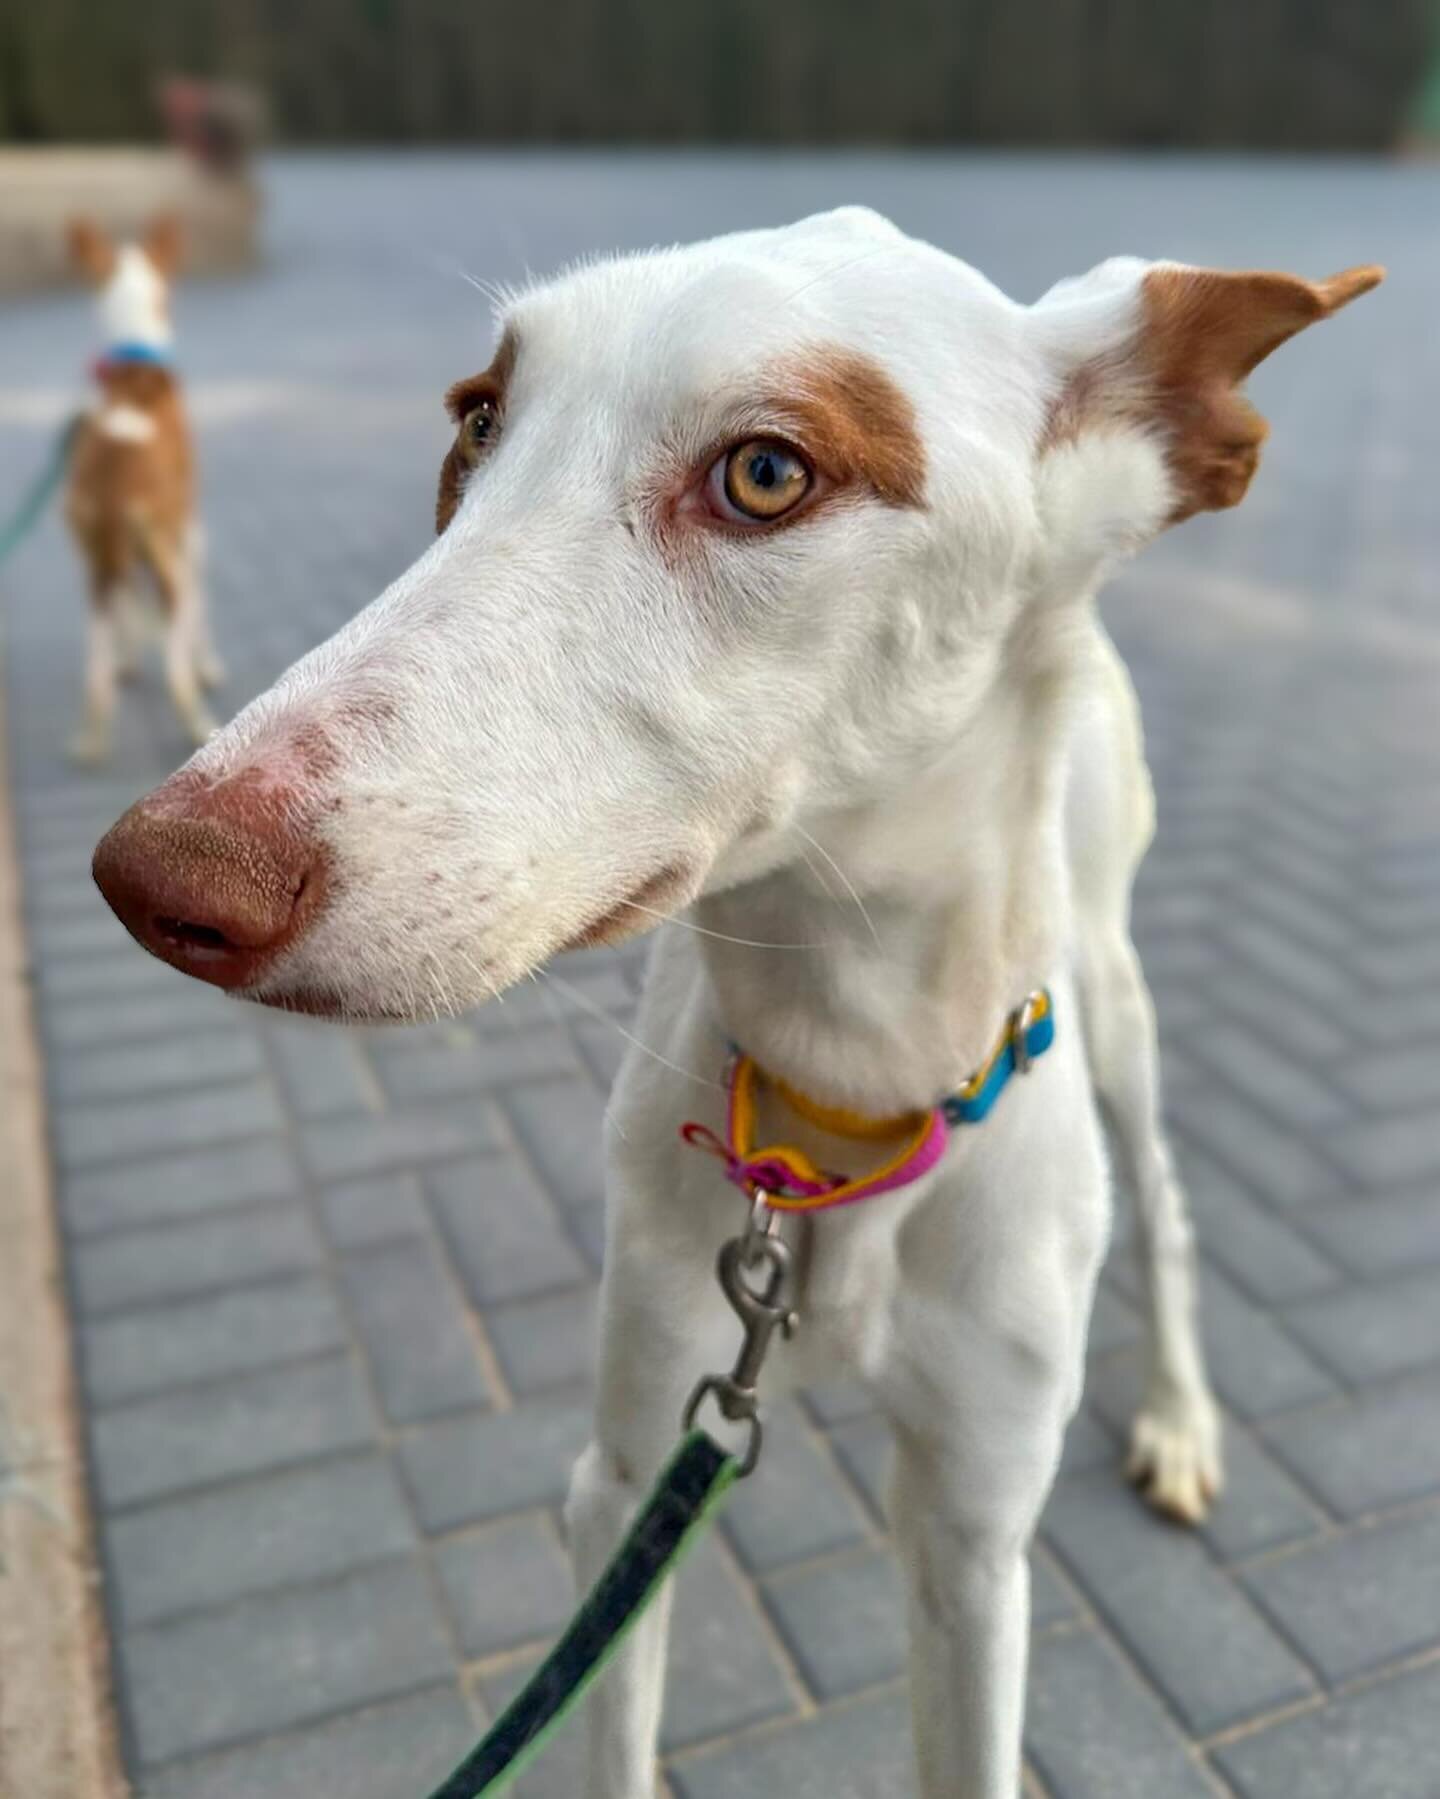 Today is a special day for a number of reasons 🩷💛🩵

1. It&rsquo;s International Day of The Podenco - a day to acknowledge and celebrate this magnificent breed who face the worst kind of cruelty in Spain. We love and admire them every day, but toda